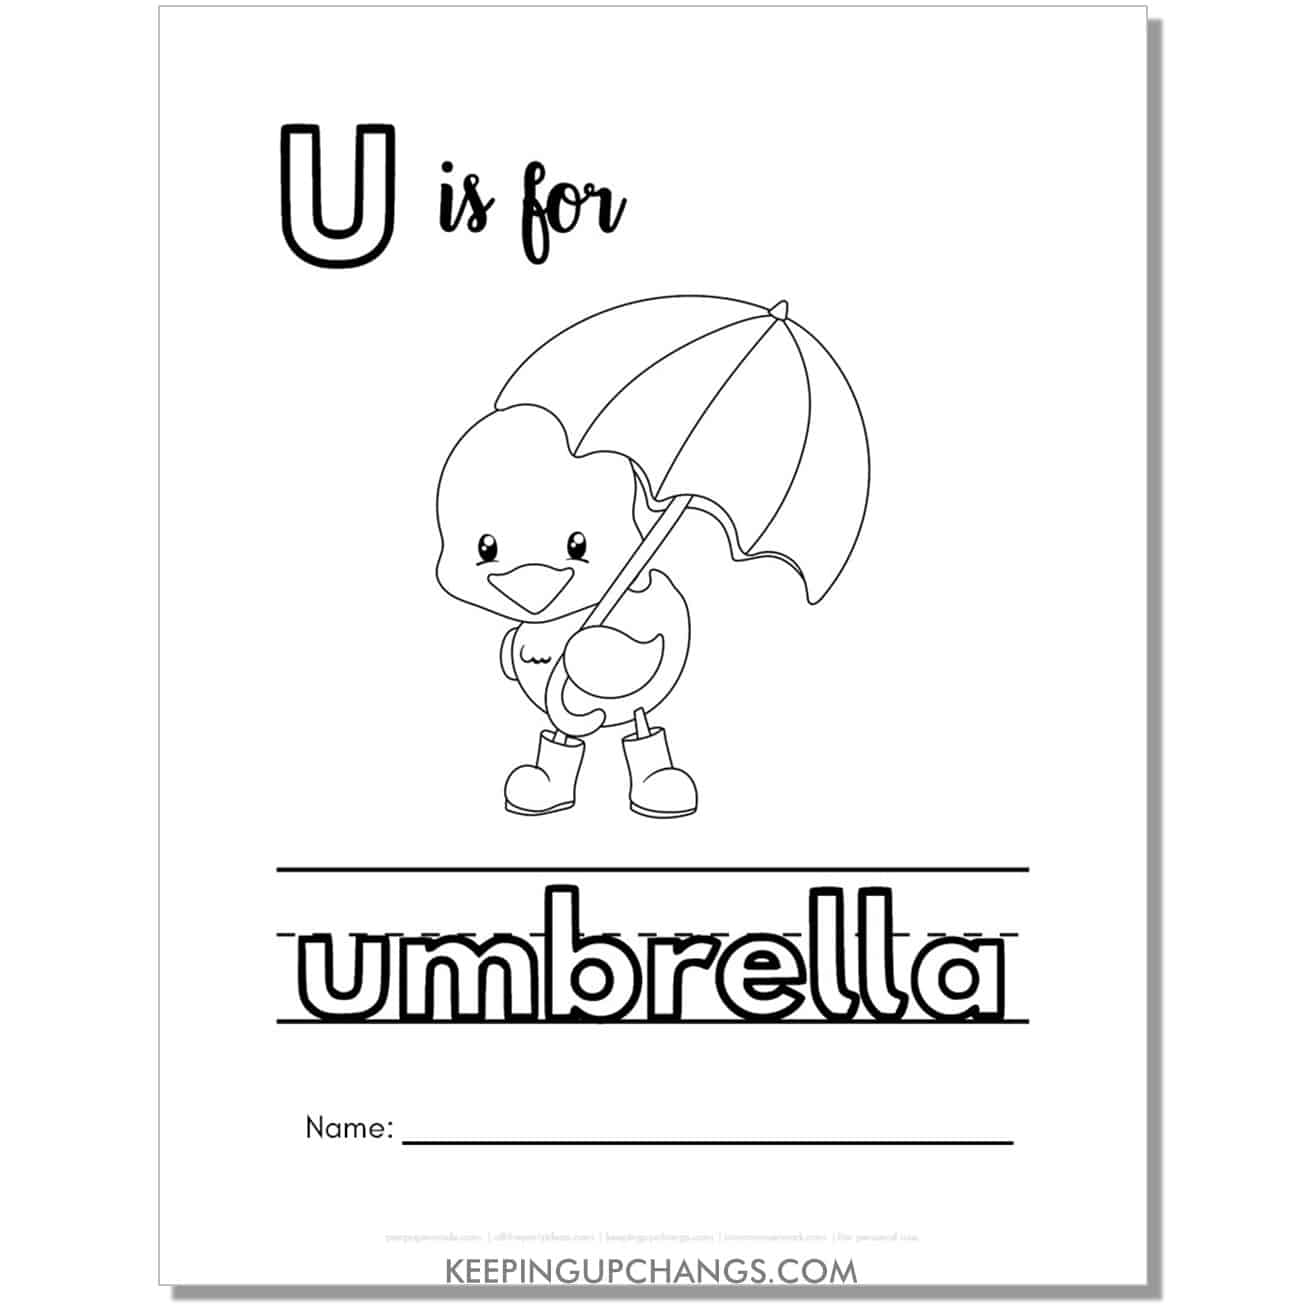 cute letter u coloring page worksheet with umbrella.